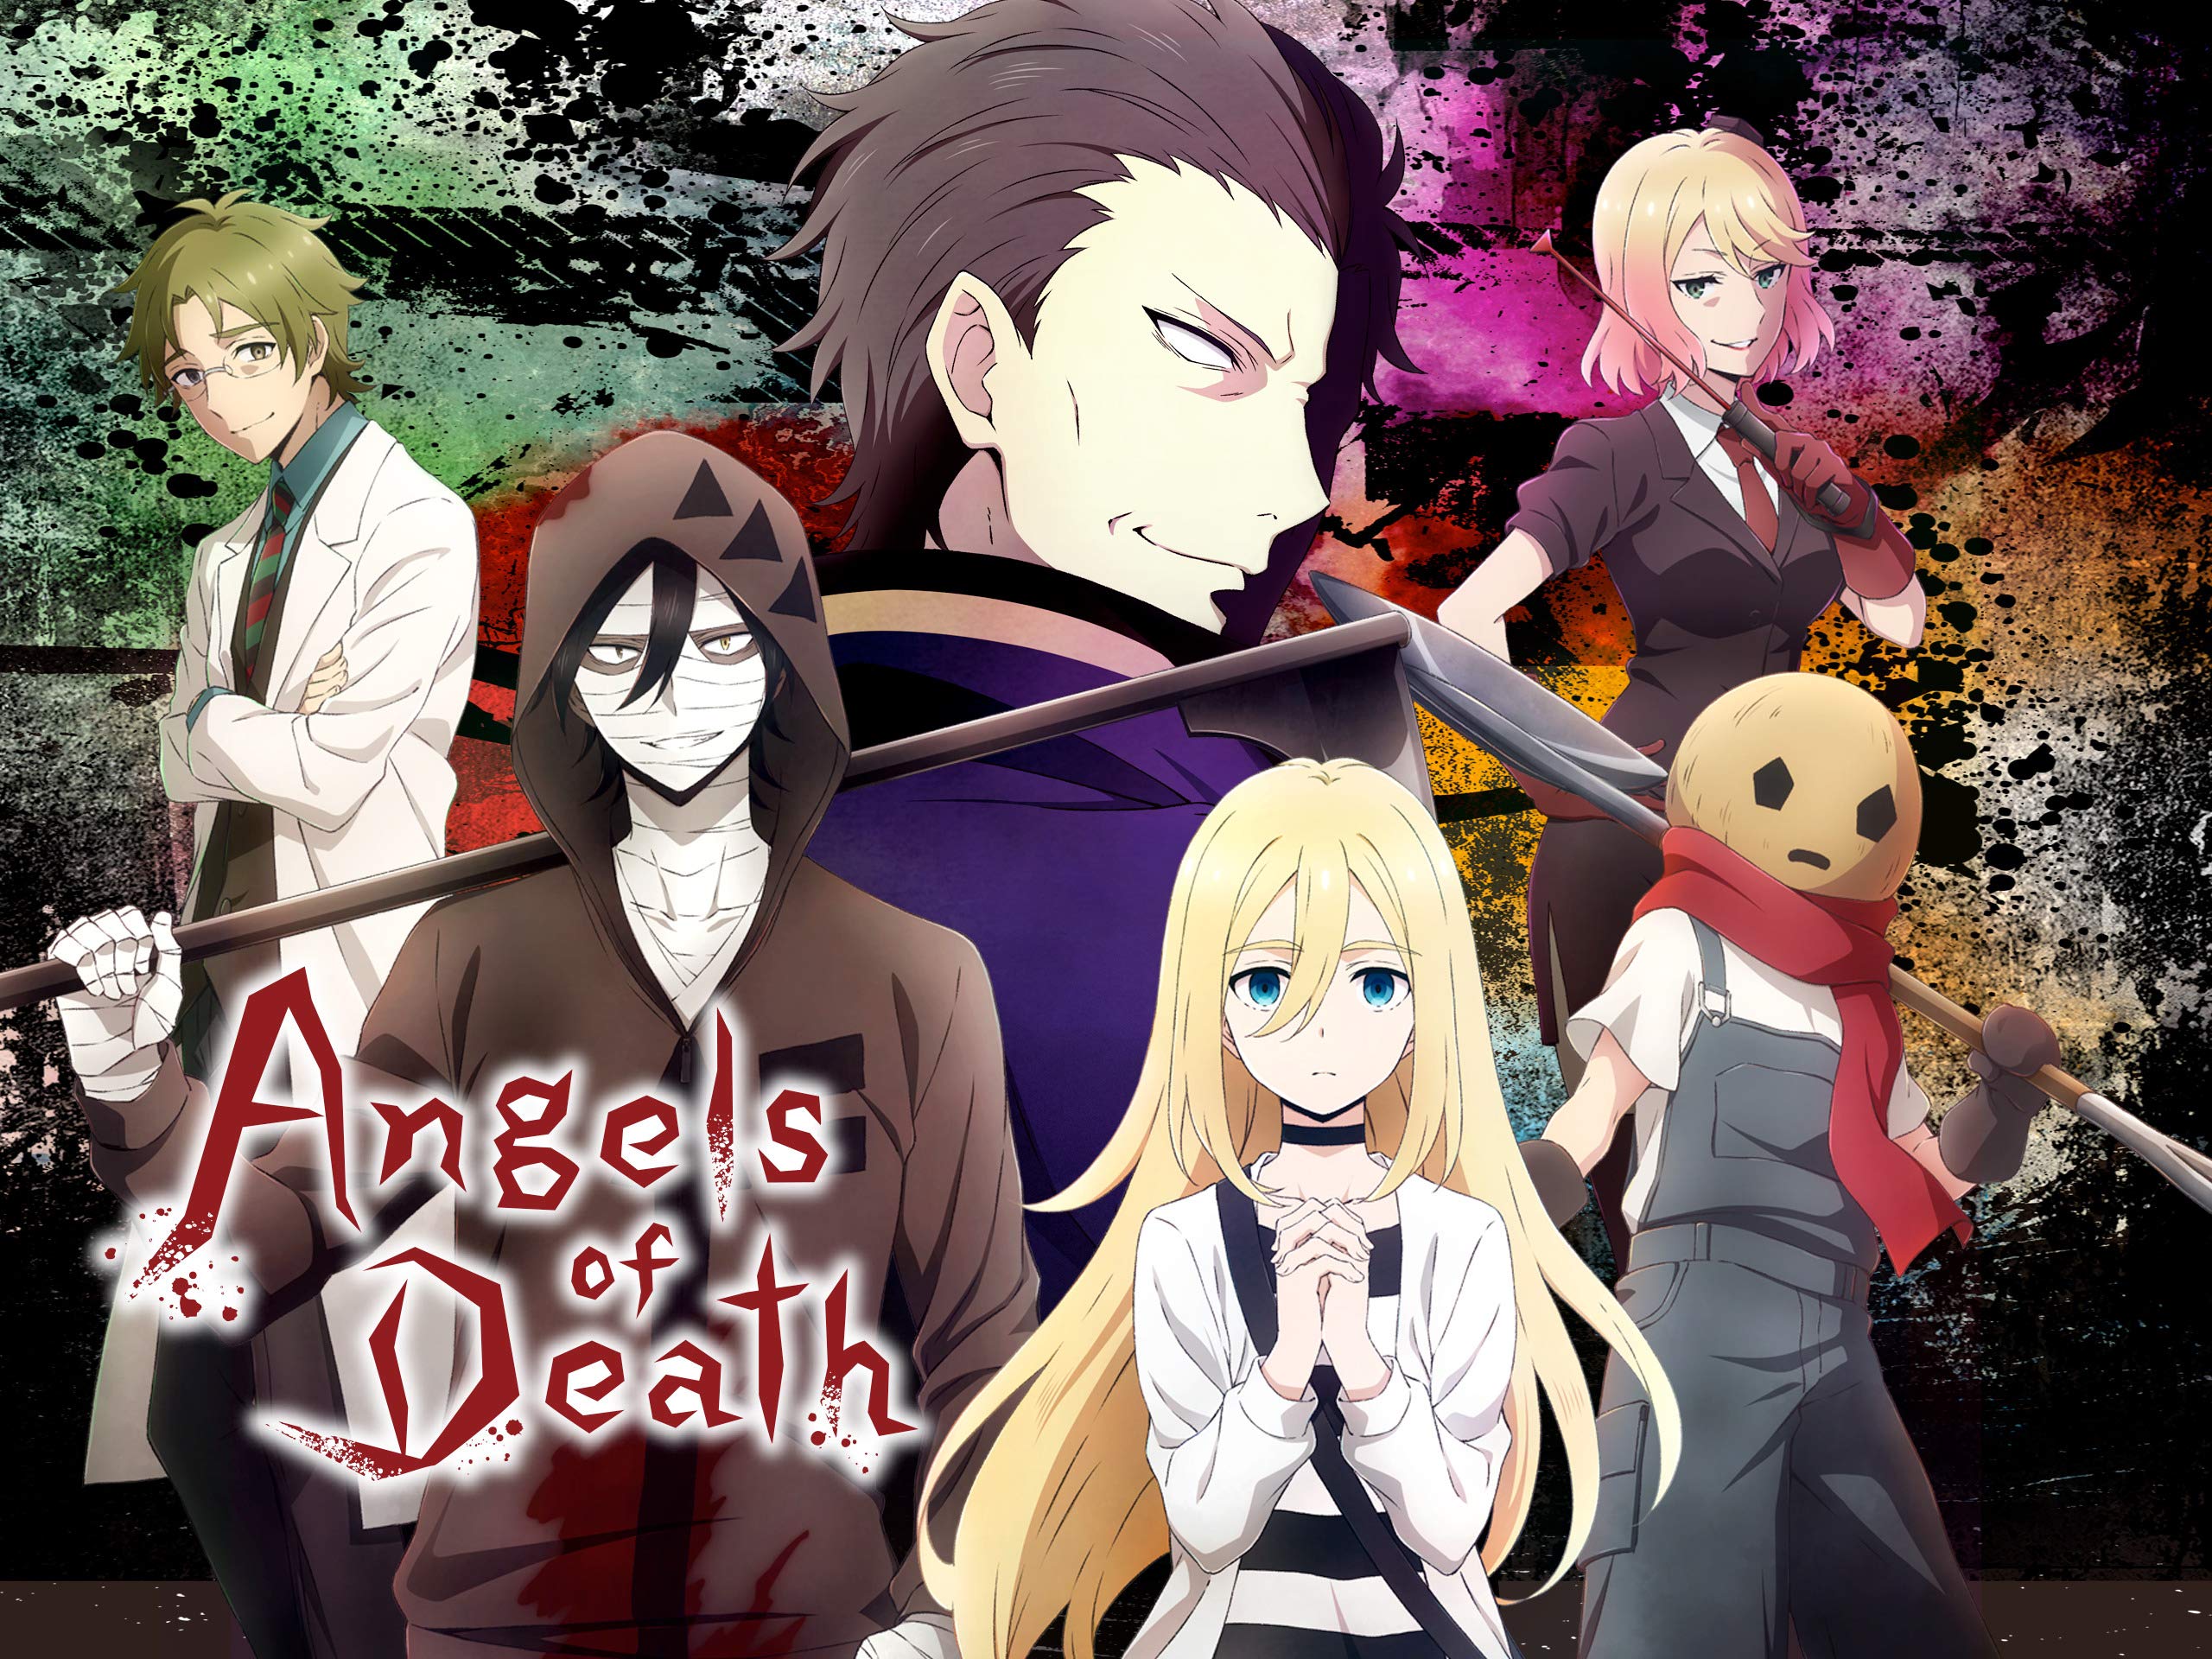 Angels of Death ep 5 - Crazy Guys and Dolls - I drink and watch anime